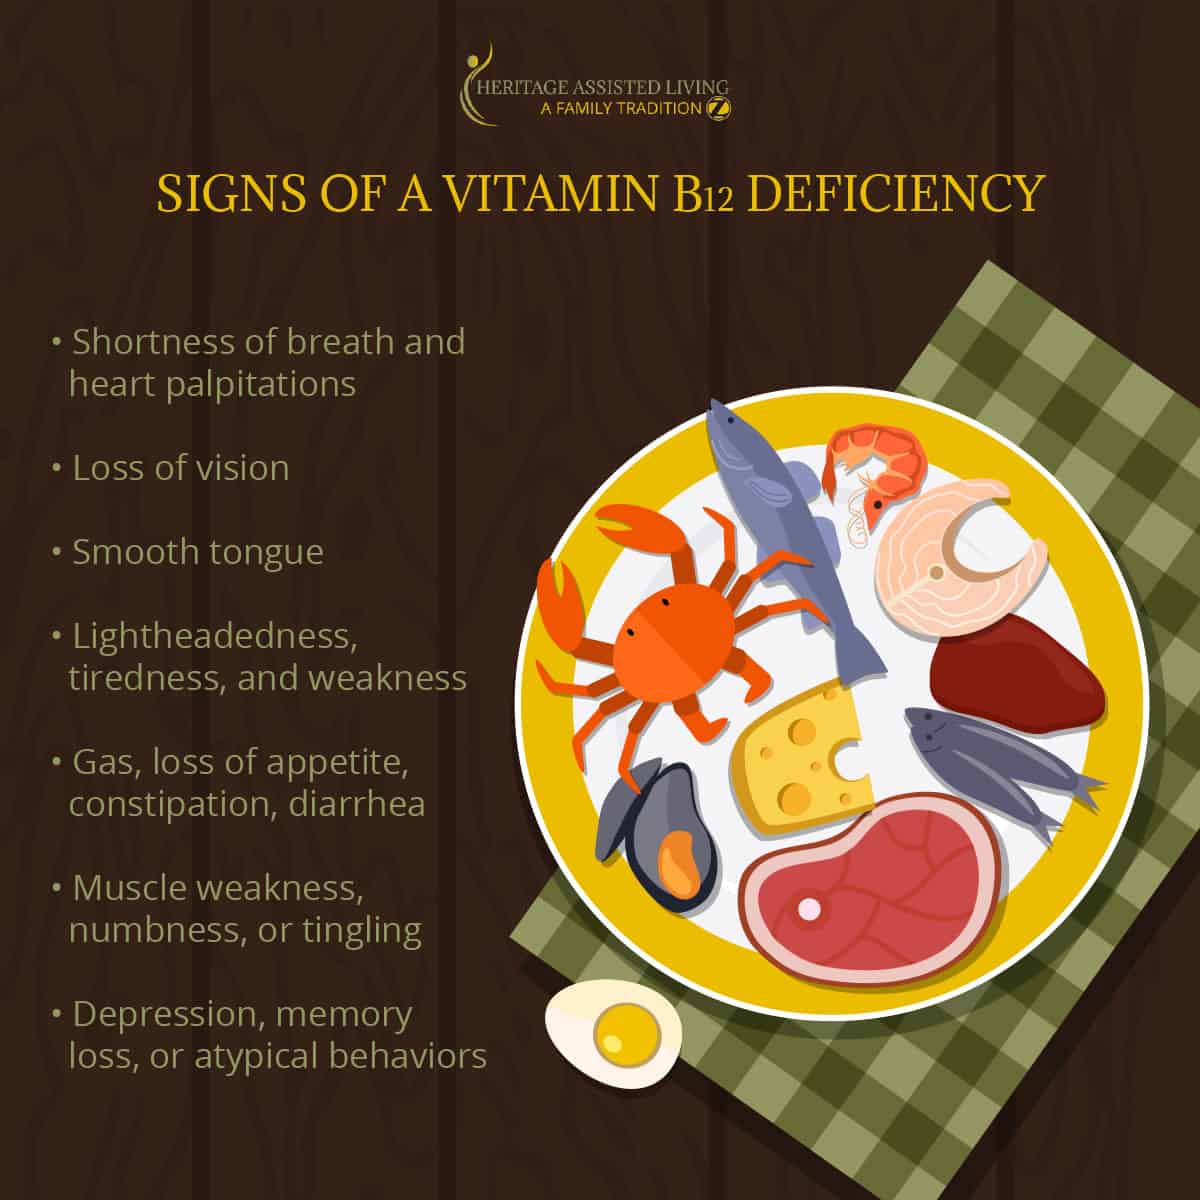 Signs-of-a-Vitamin-B12-Deficiency-Infographic